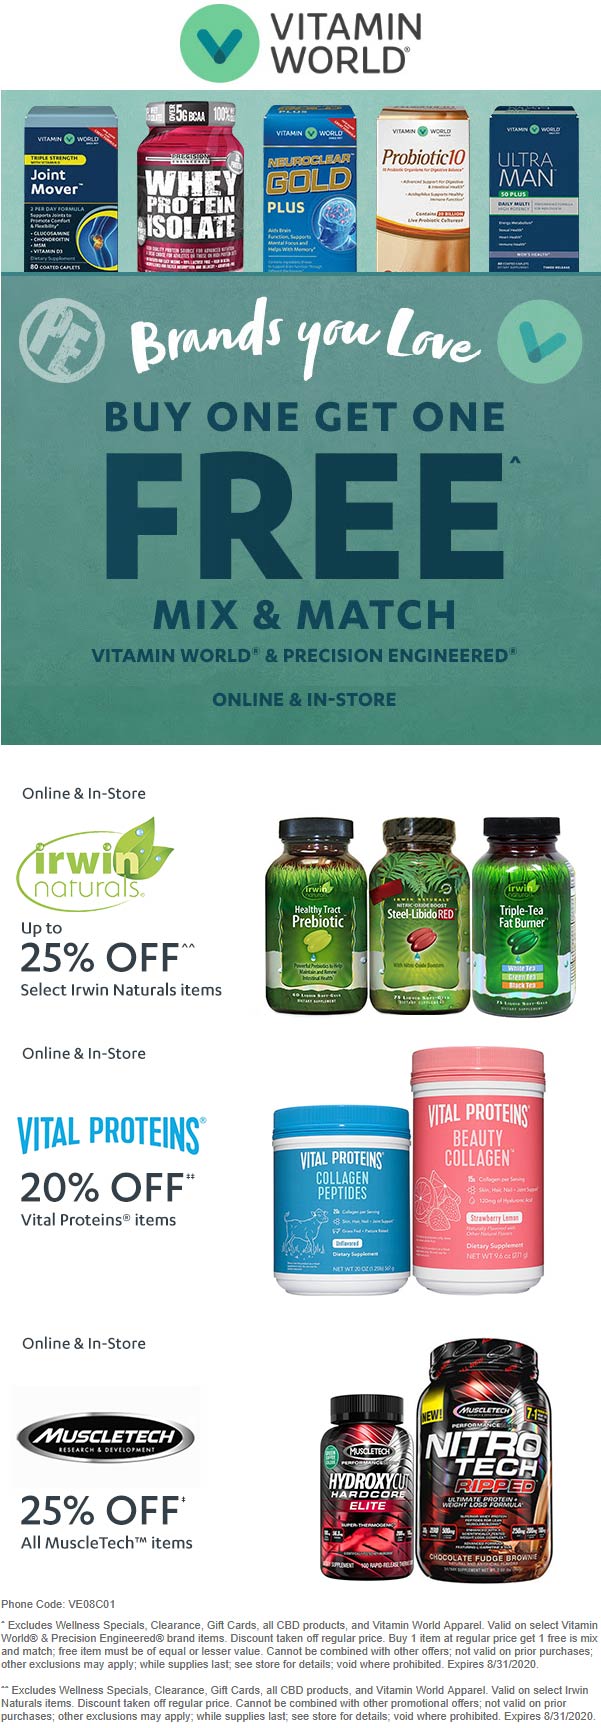 Vitamin World stores Coupon  Second store brand supplement or precision engineered free at Vitamin World, or online via promo code VE08C01 #vitaminworld 